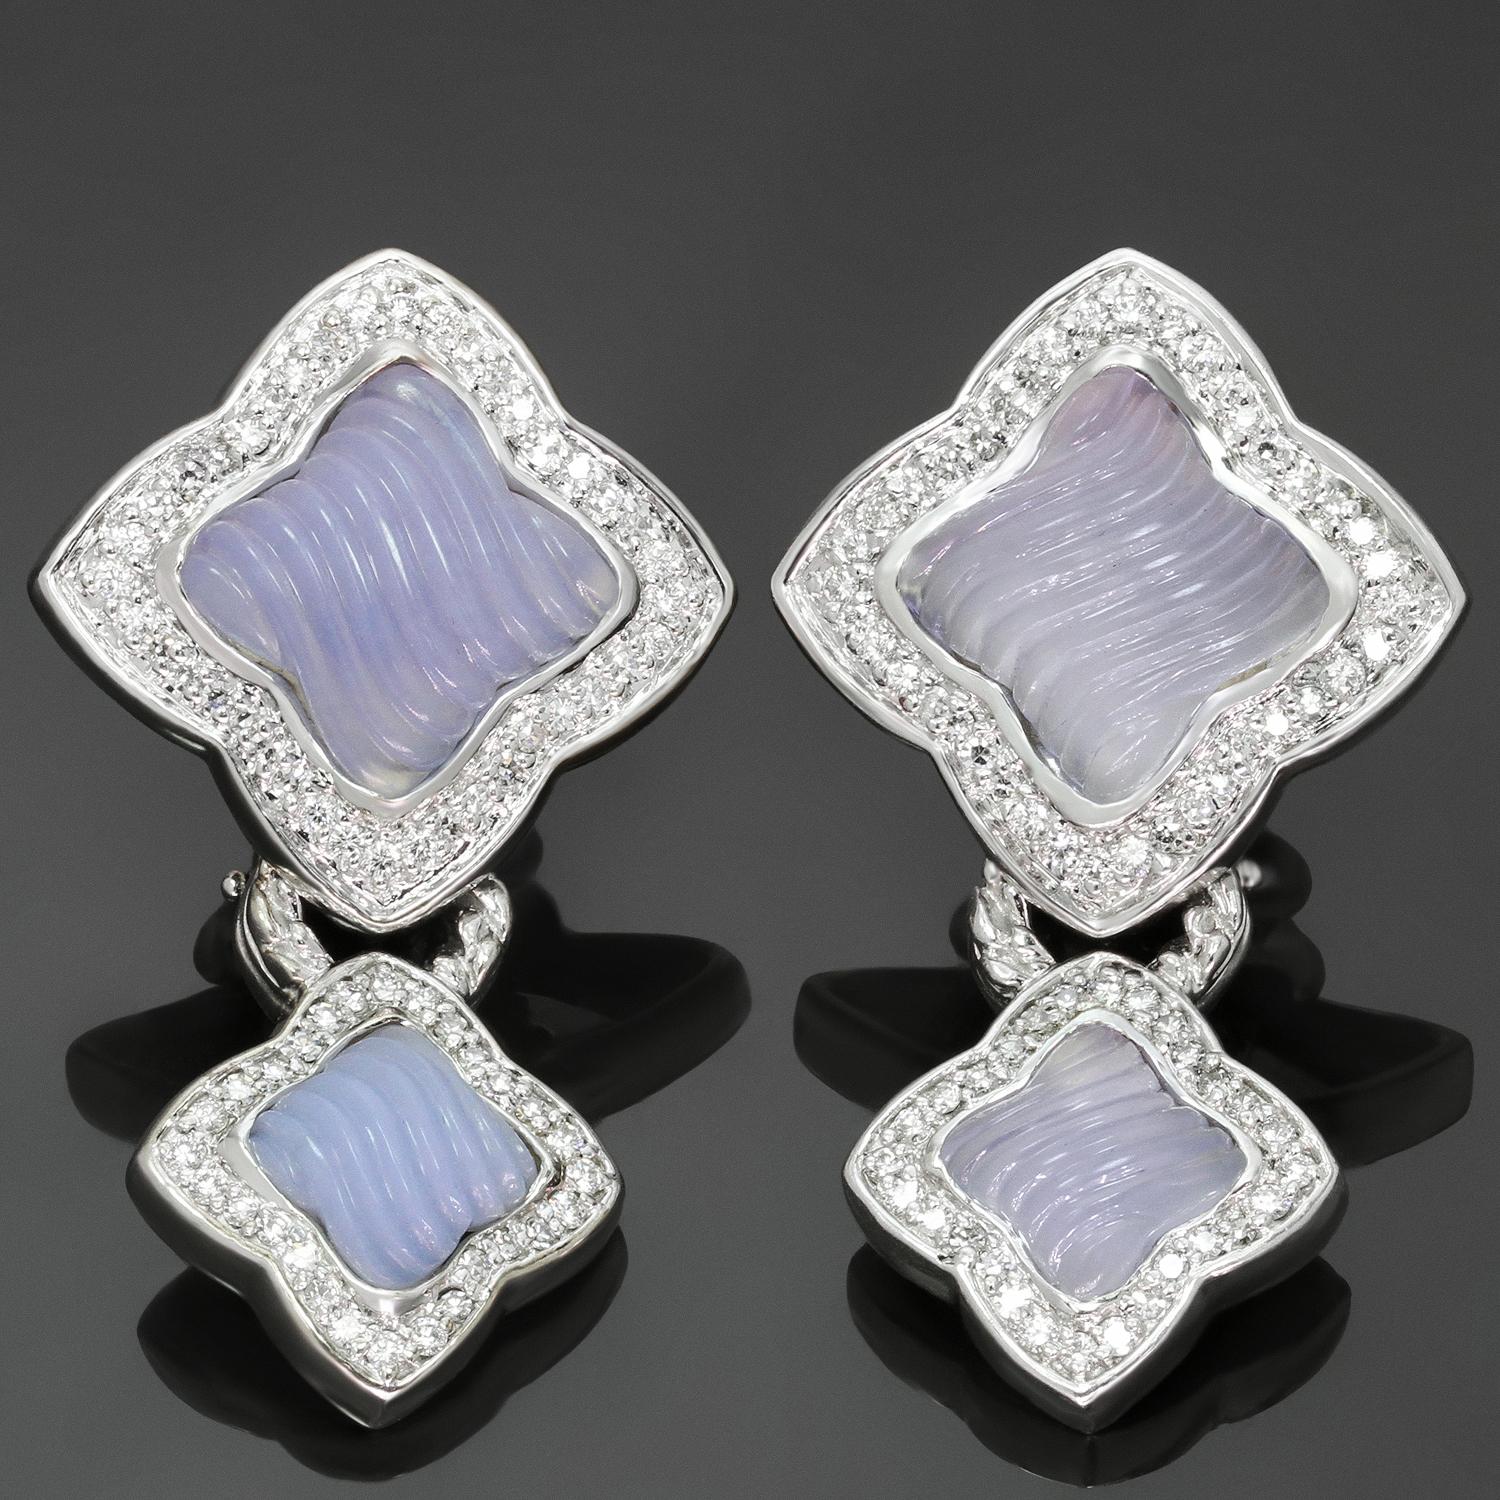 These gorgeous David Yurman earrings are crafted in 18k white gold and set carved chalcedony stones and round diamonds of an estimated 2.00 carats. The chalcedony stones in one earring are slightly faded. The drops on these versatile earrings are